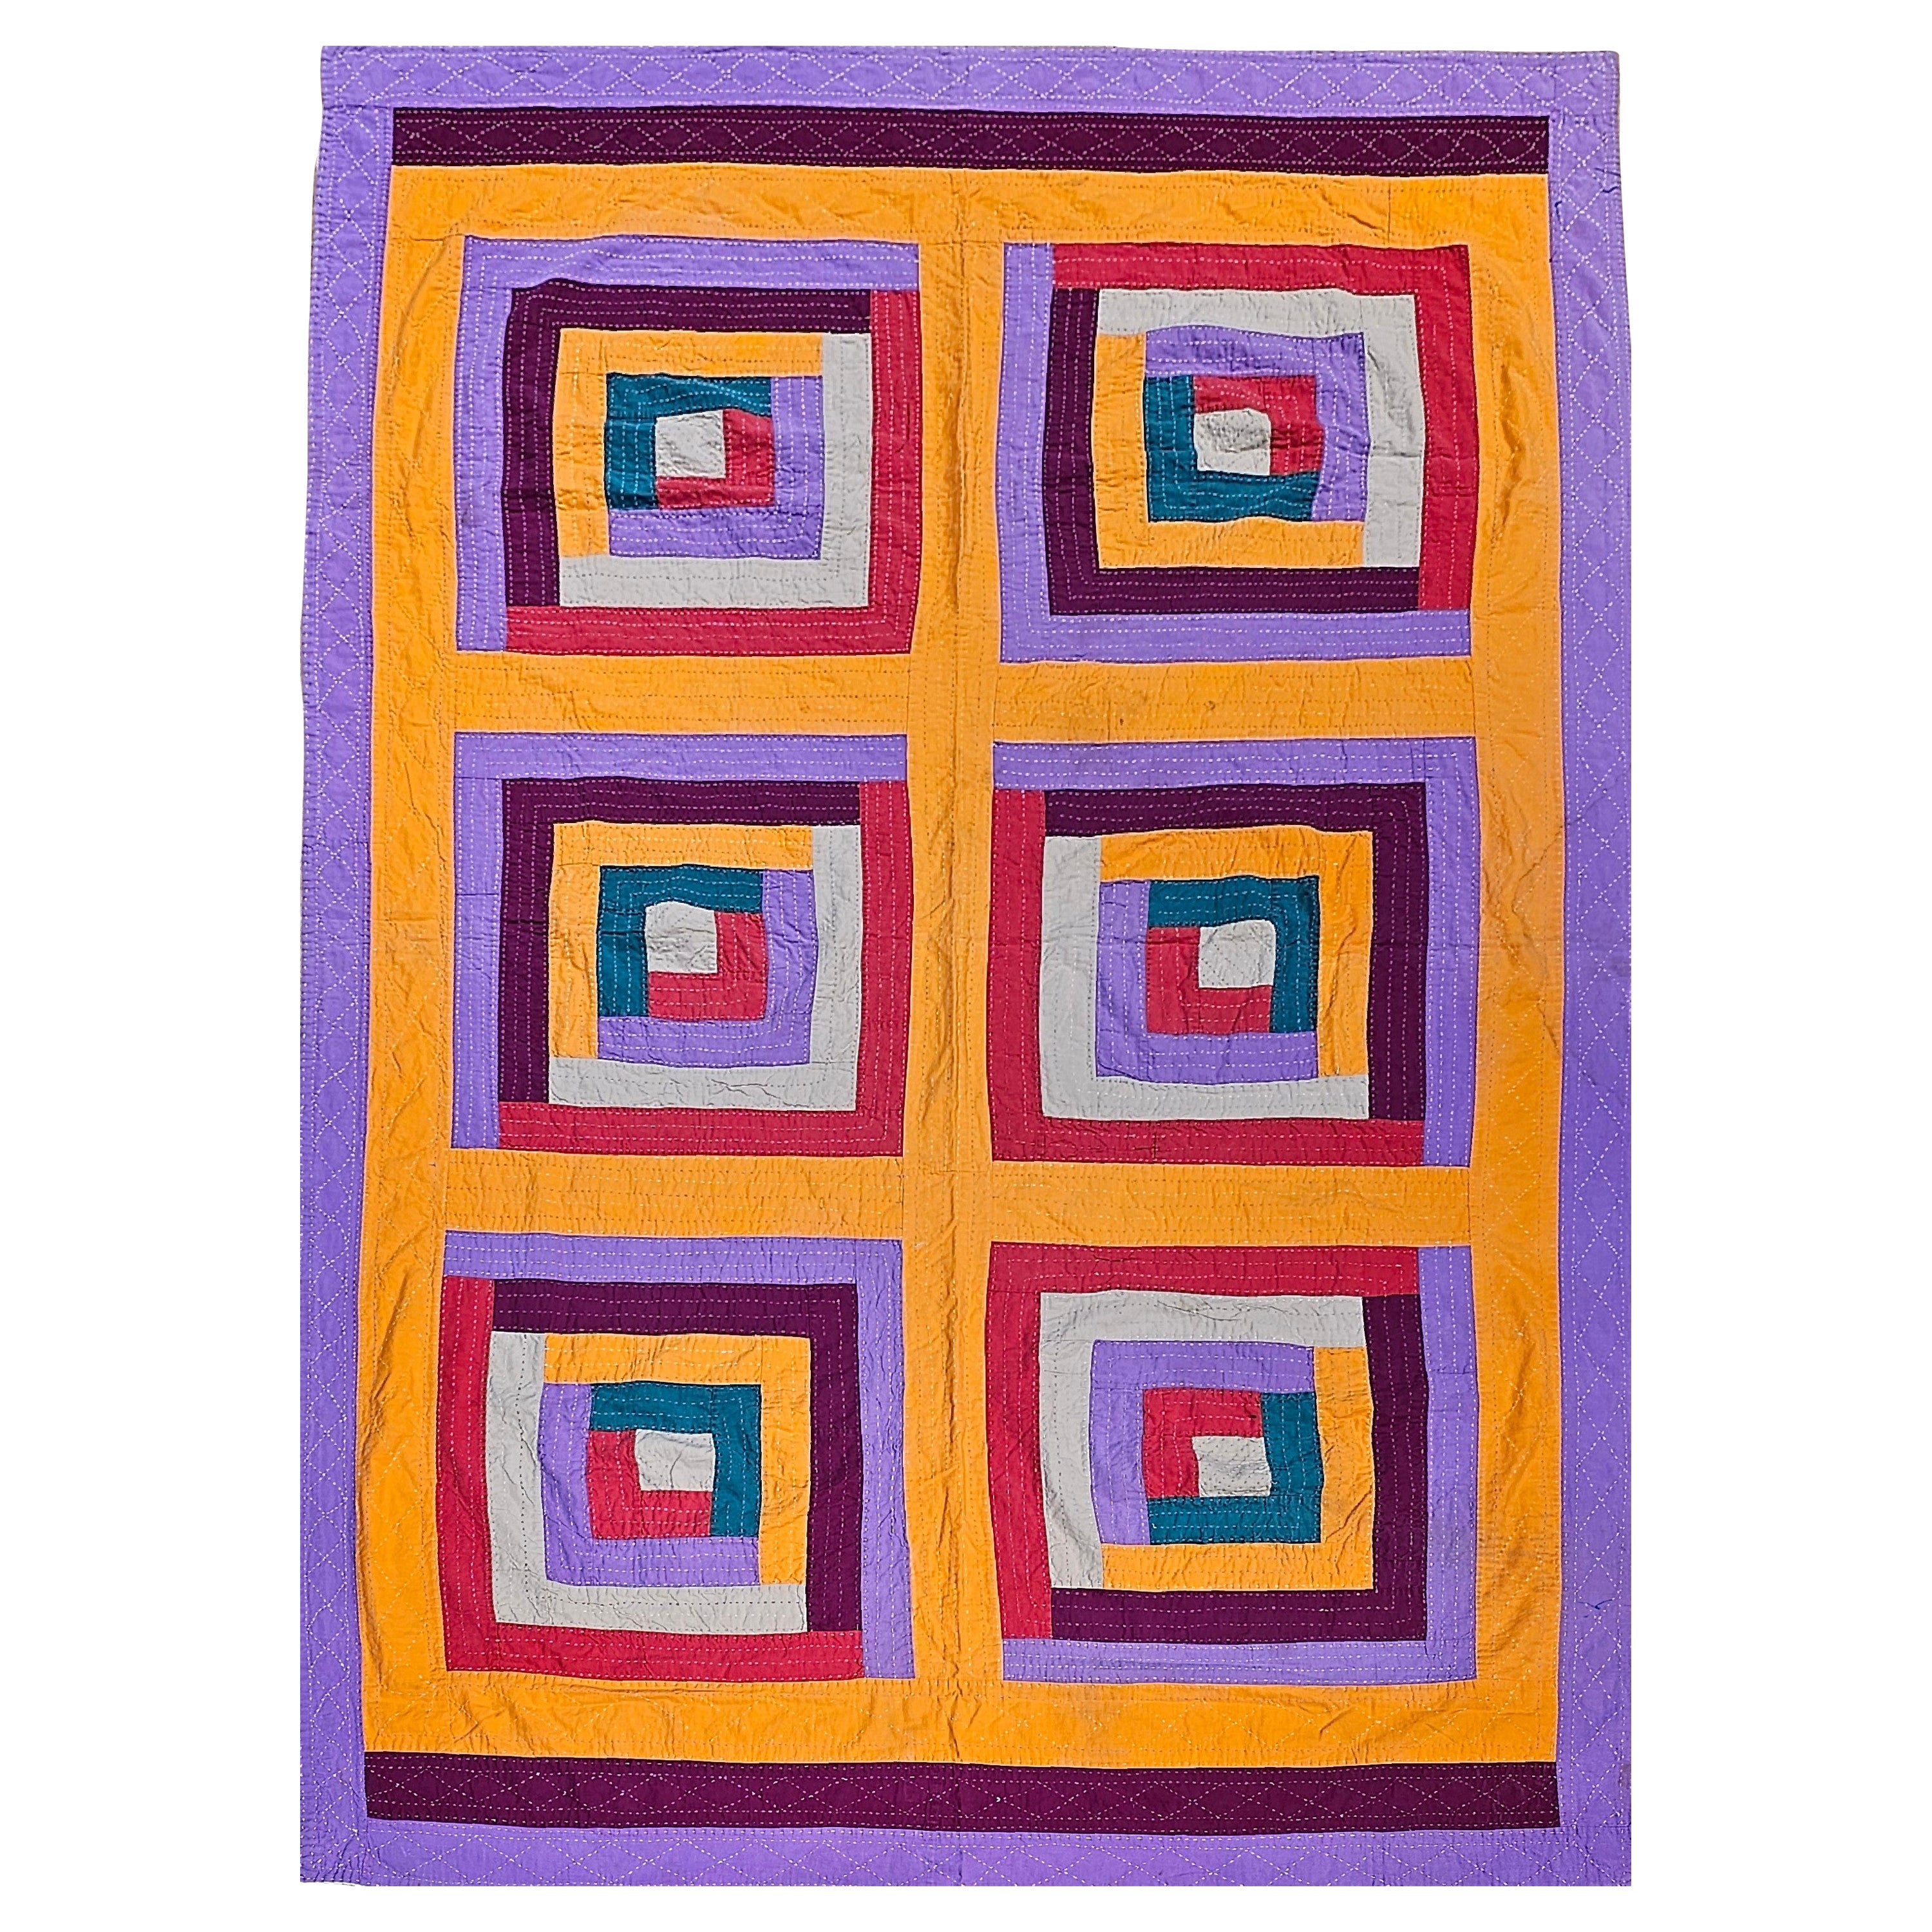 Mid 20th Century African American Southern Quilt in Red, Purple, Green, Orange